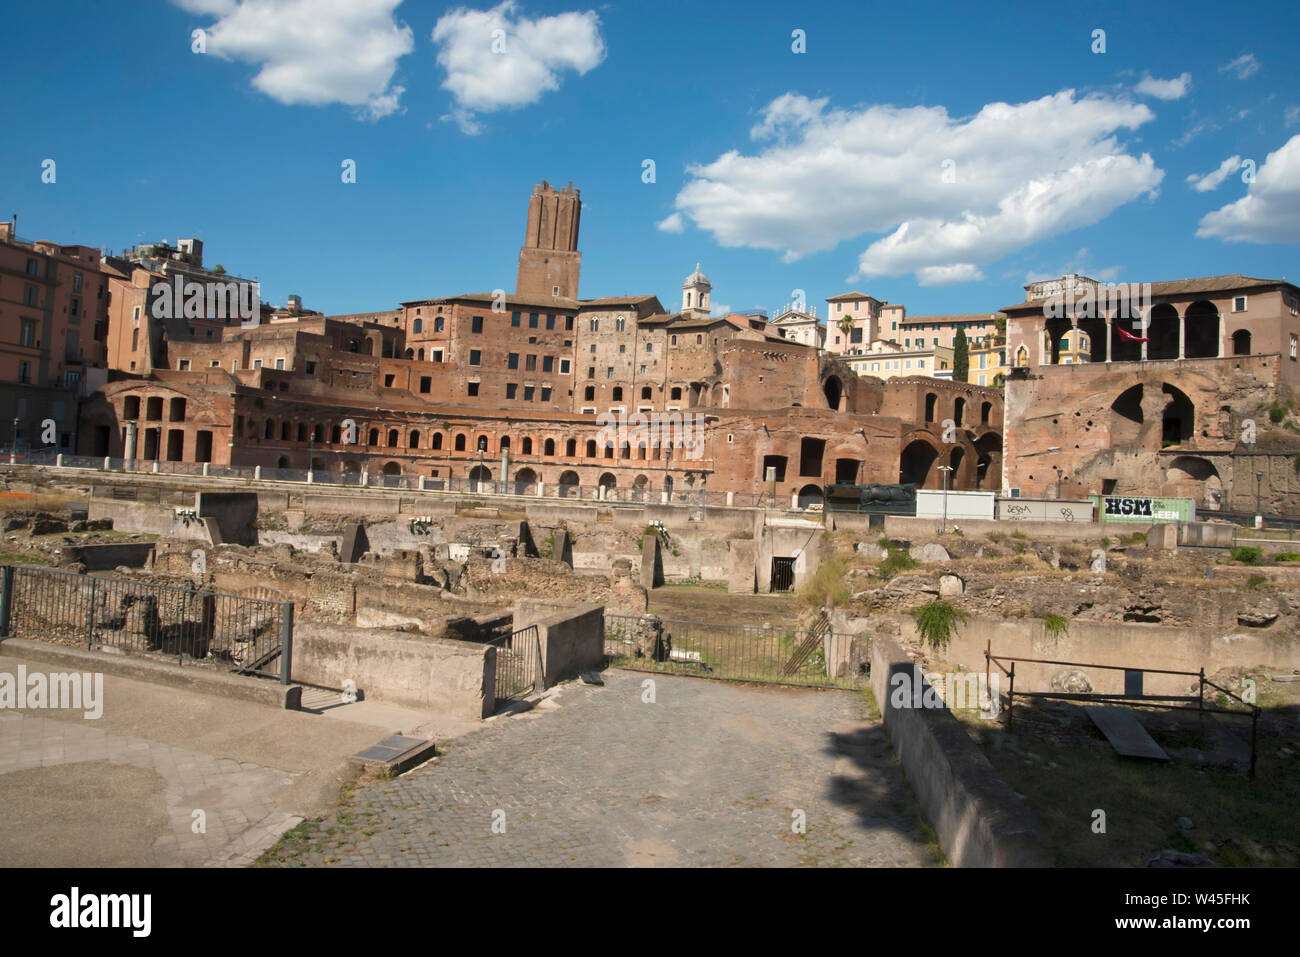 Roman forum, Roman ruins, surrounded by the remnants of ancient government buildings, Rome. Stock Photo